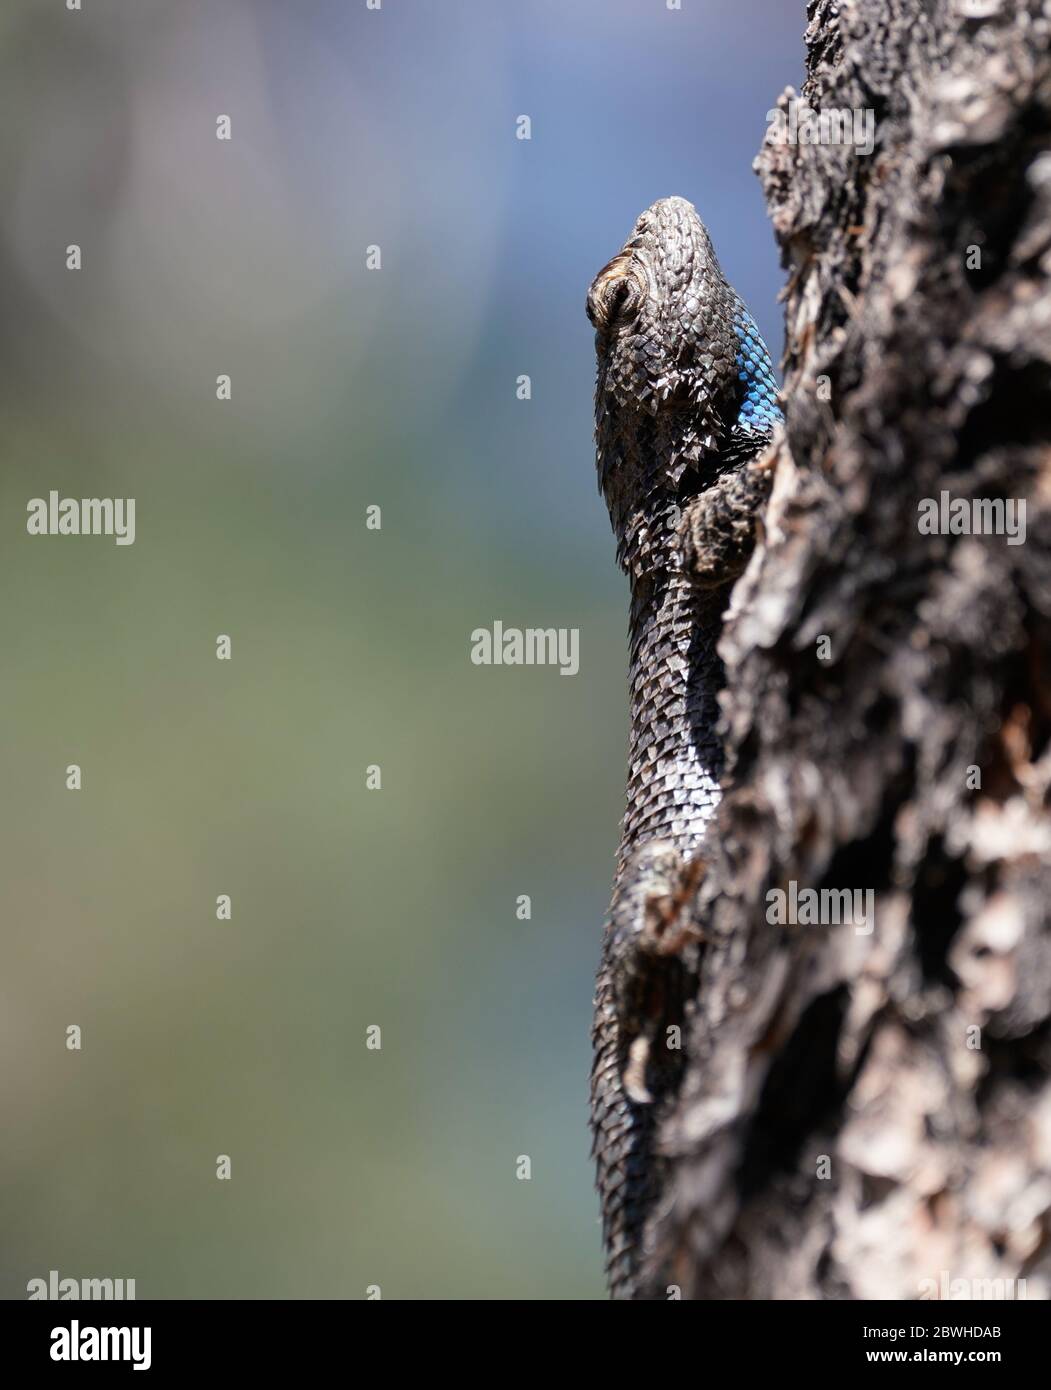 Close up of a large blue throated lizard climbing a tree in Northern Arizona. Stock Photo